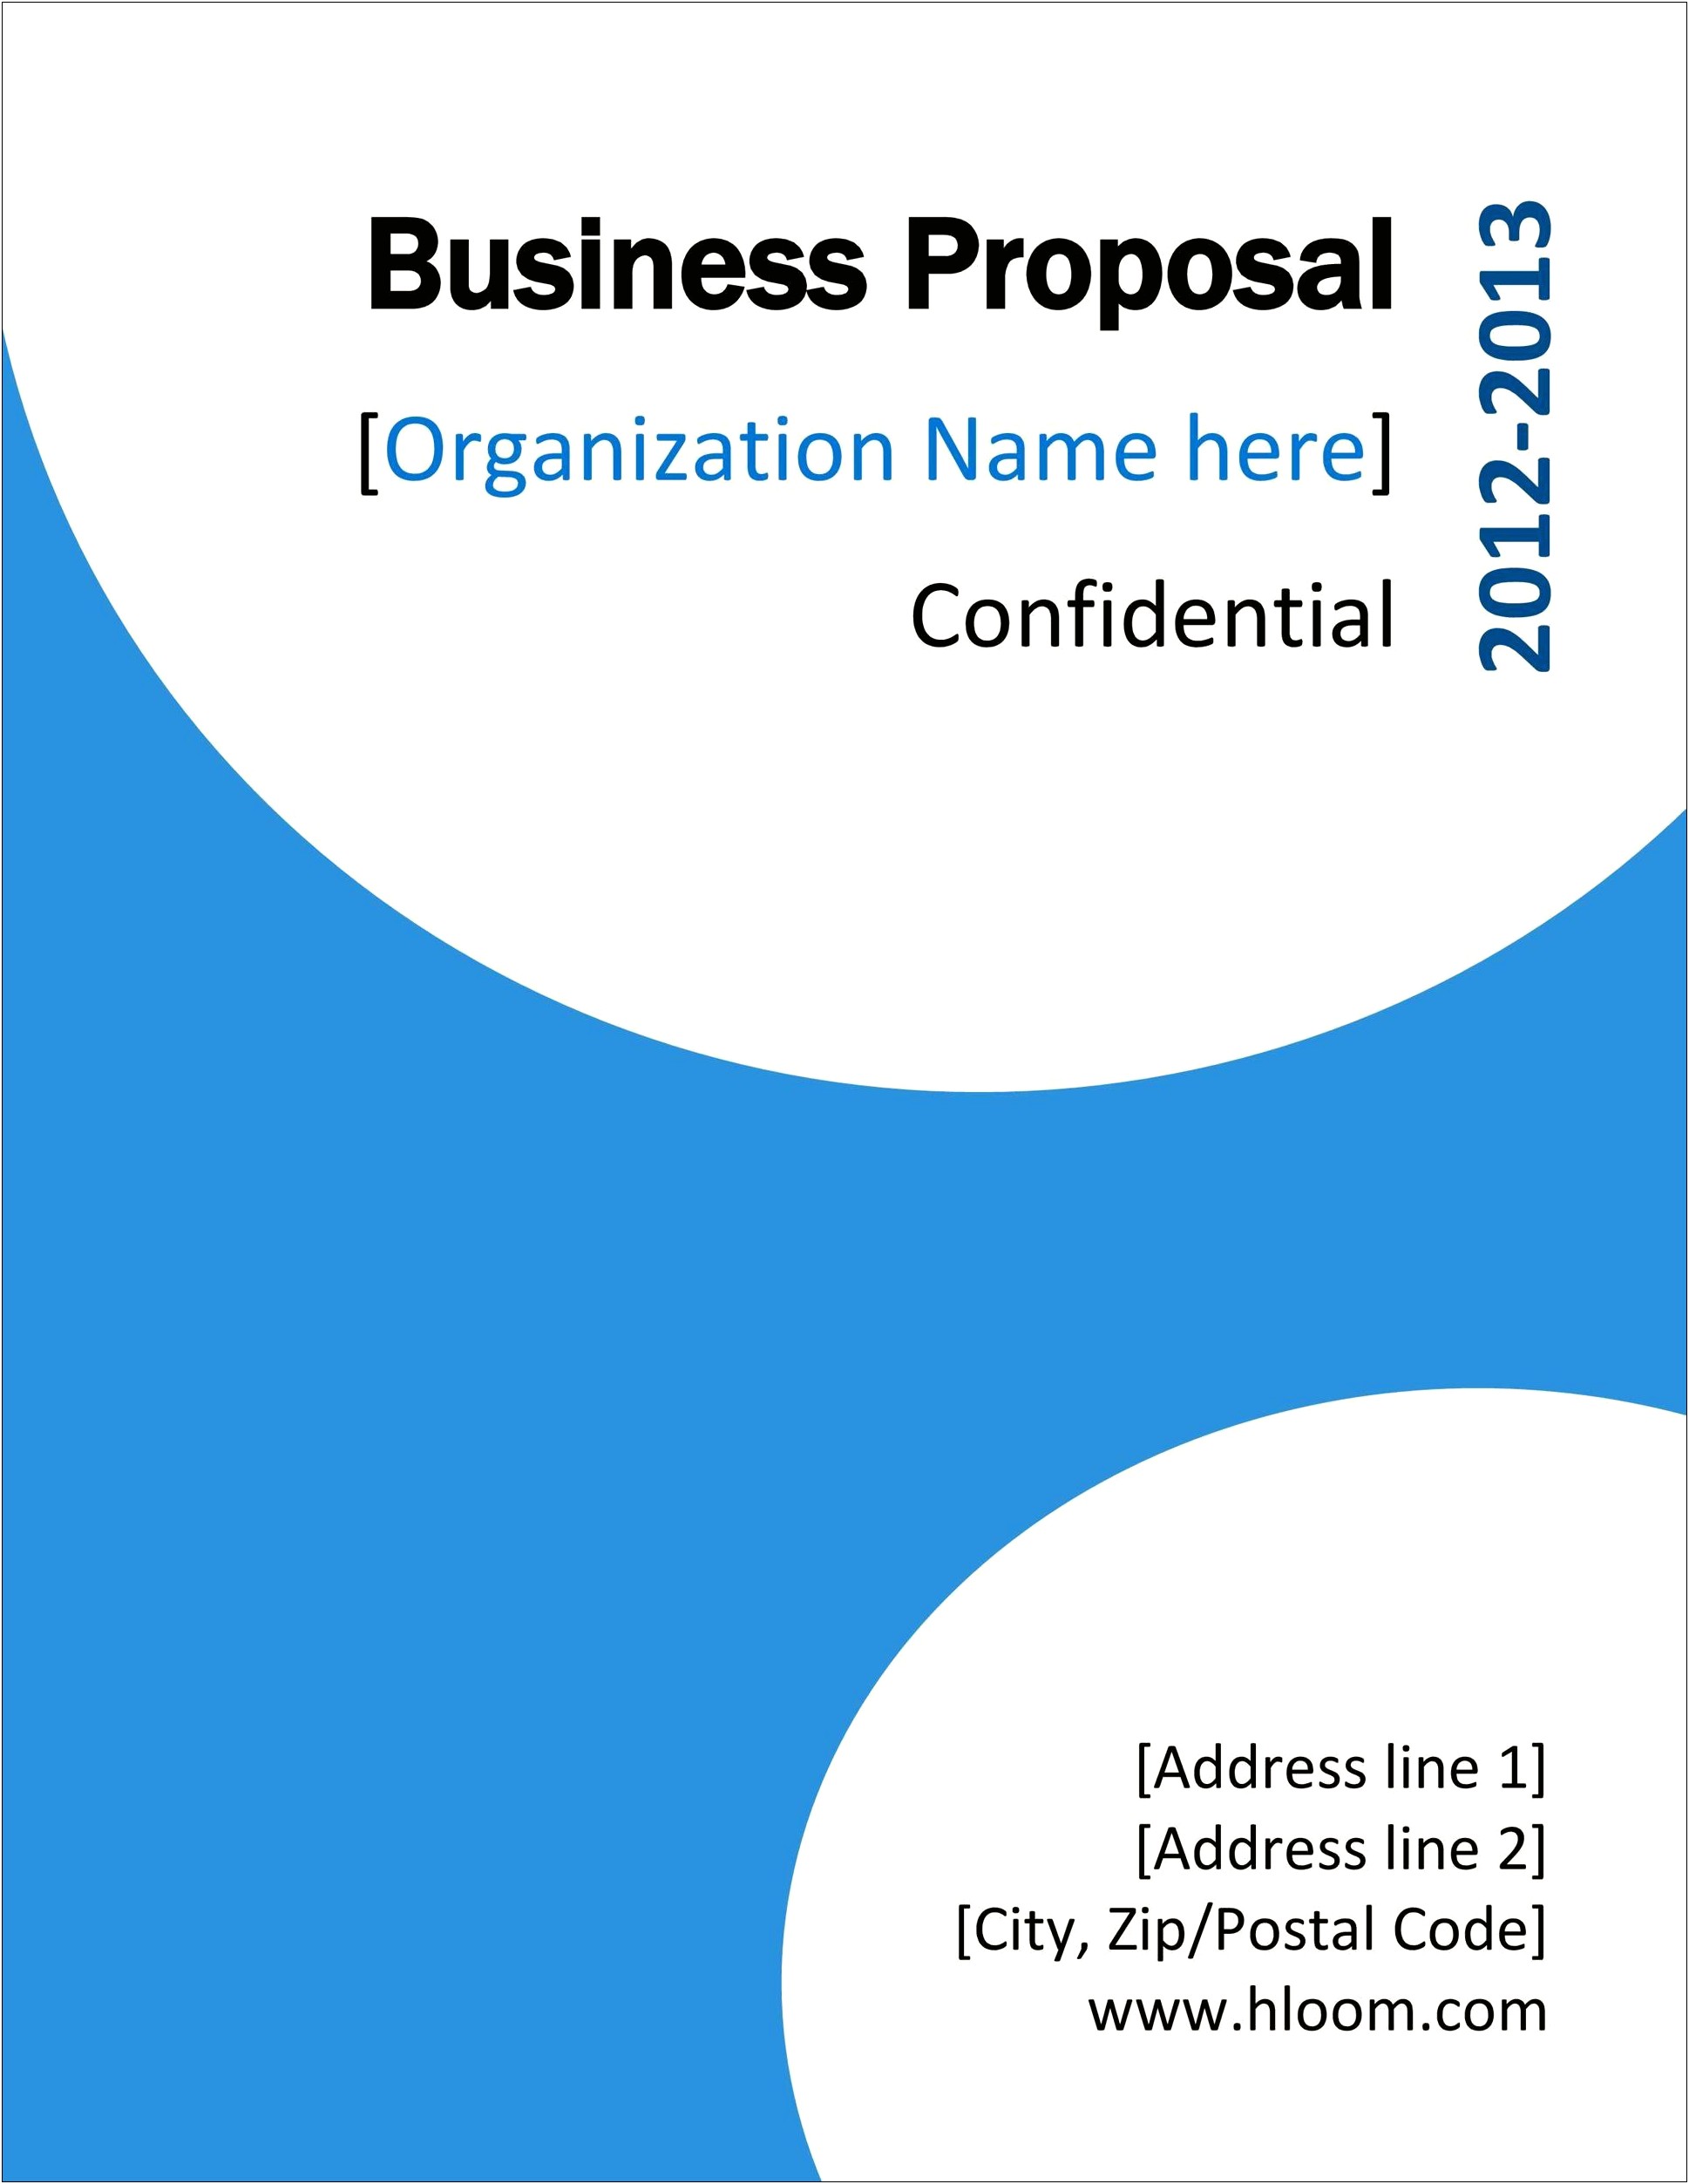 free-business-proposal-template-pdf-download-templates-resume-designs-bnv4wd41kw